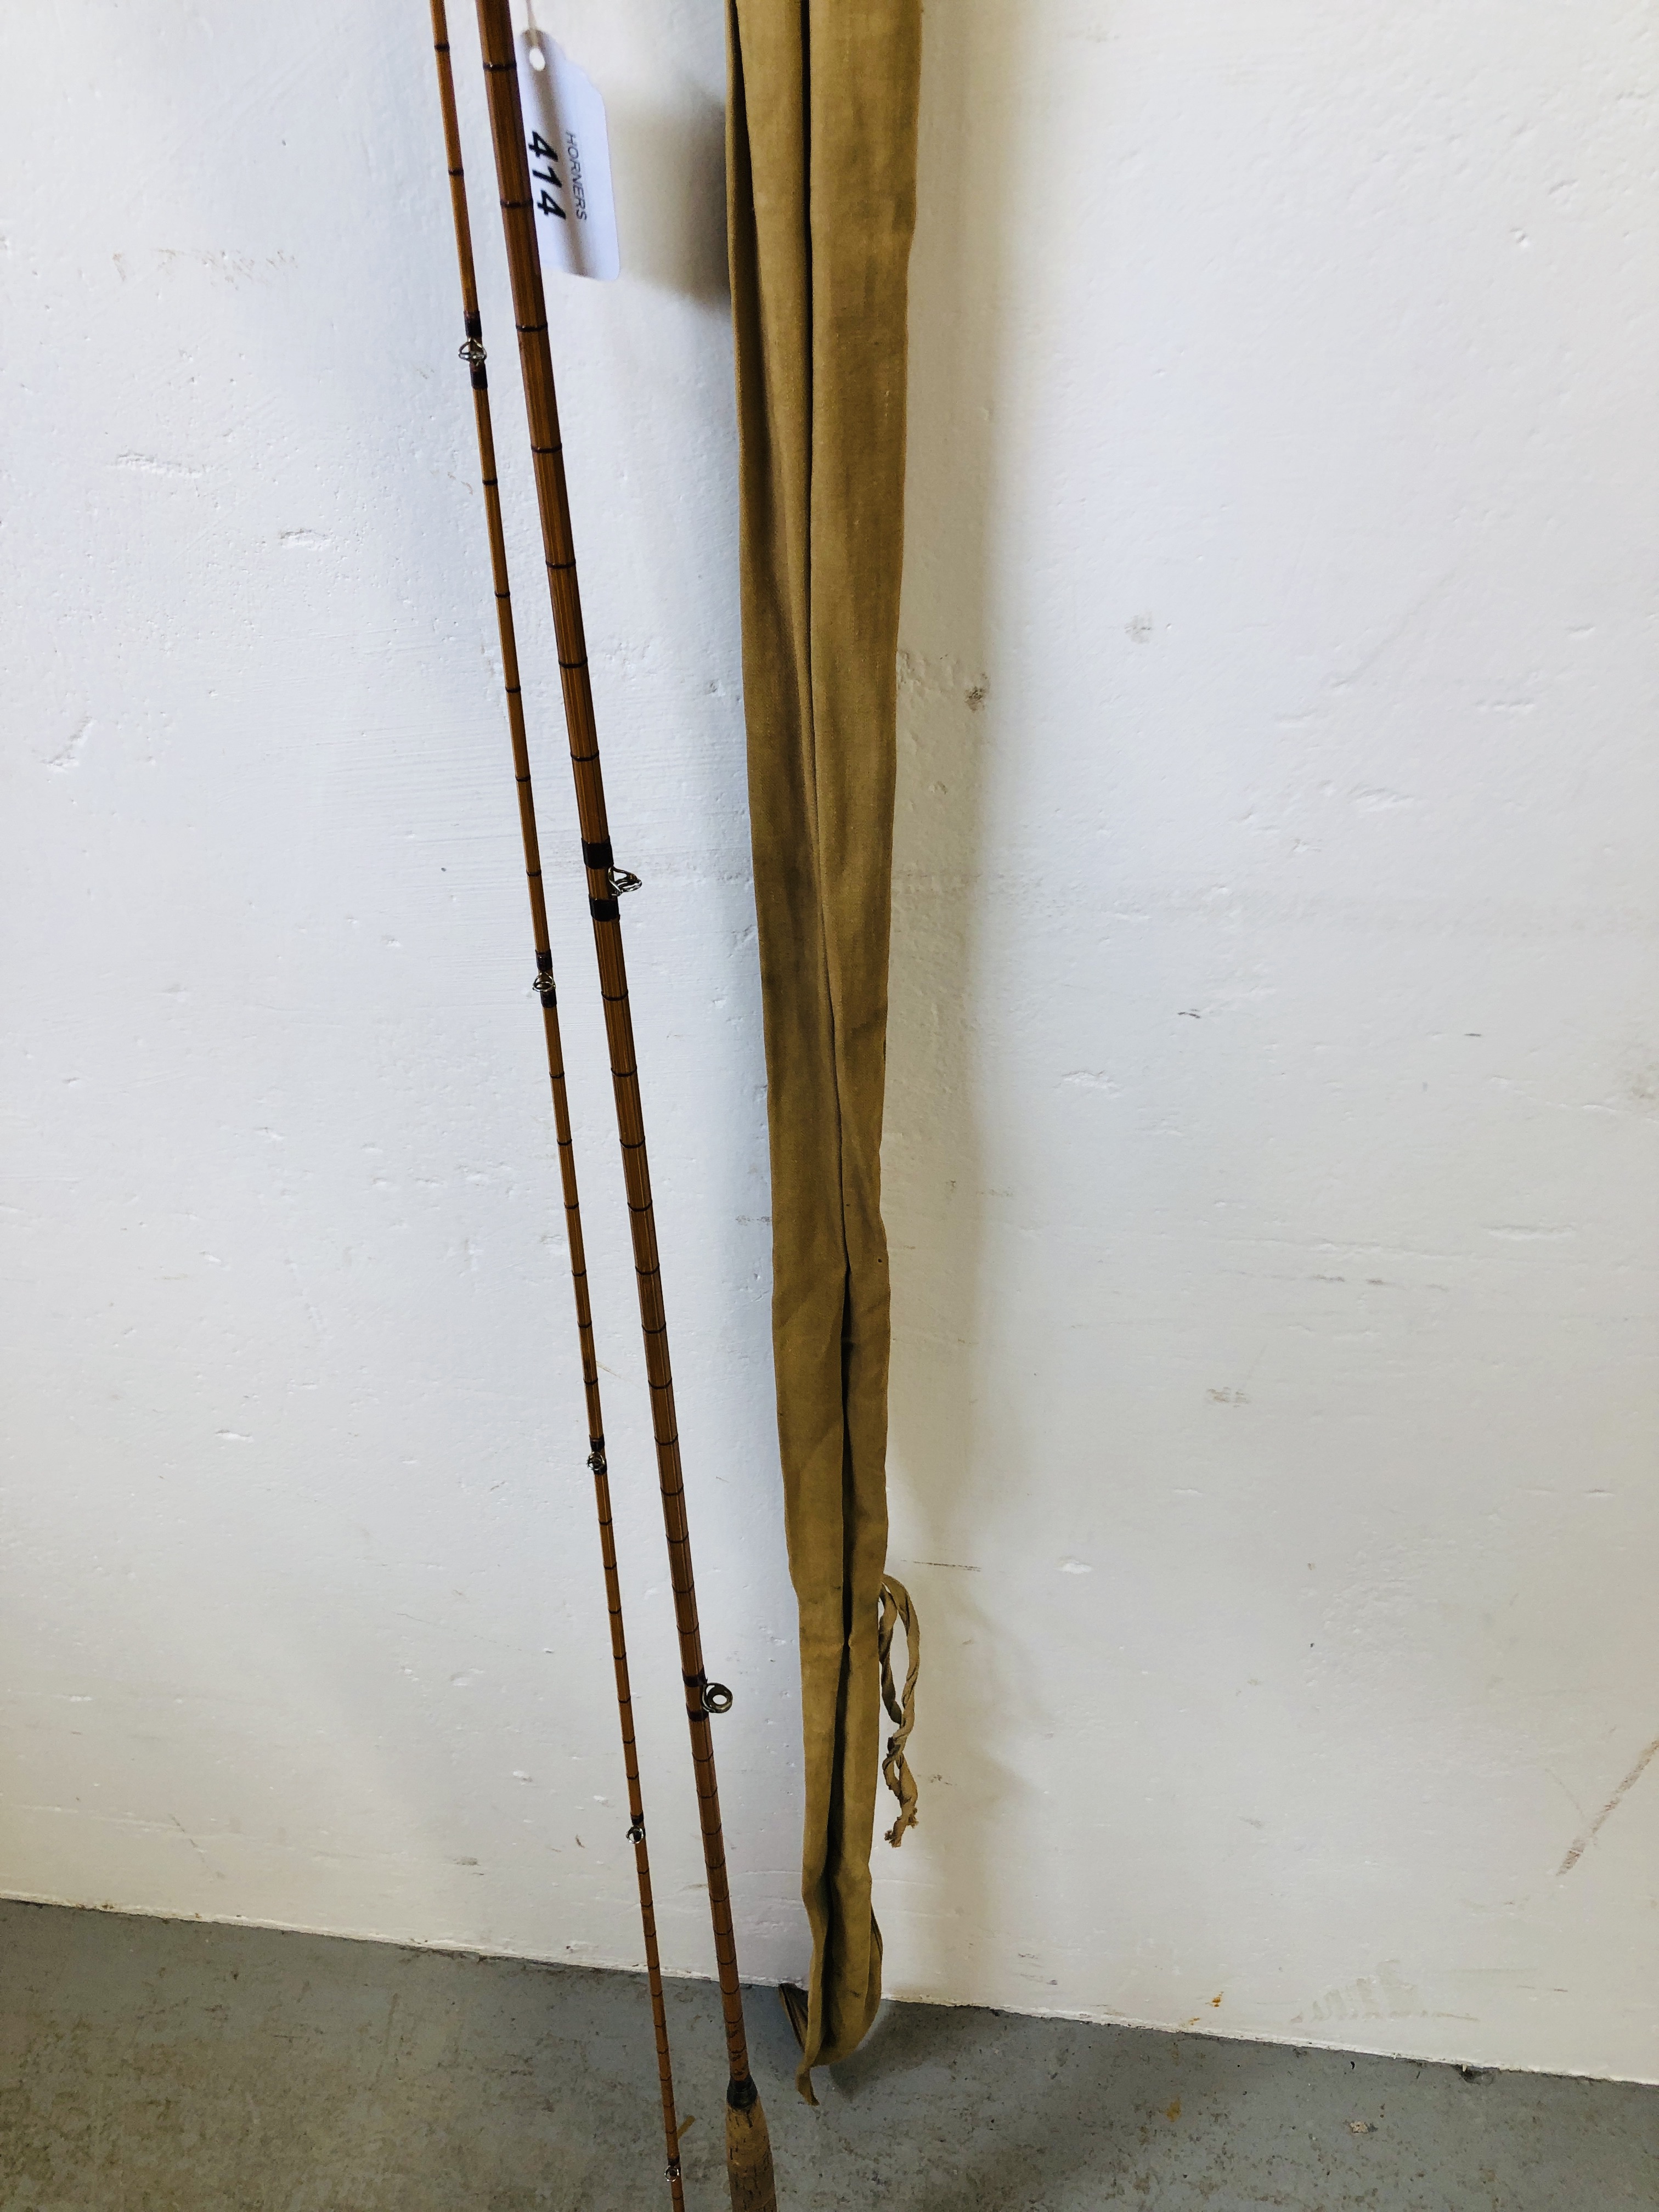 A HARDY "THE PERFECTION" TWO PIECE SPLIT CANE FISHING ROD IN BAG - Image 9 of 9